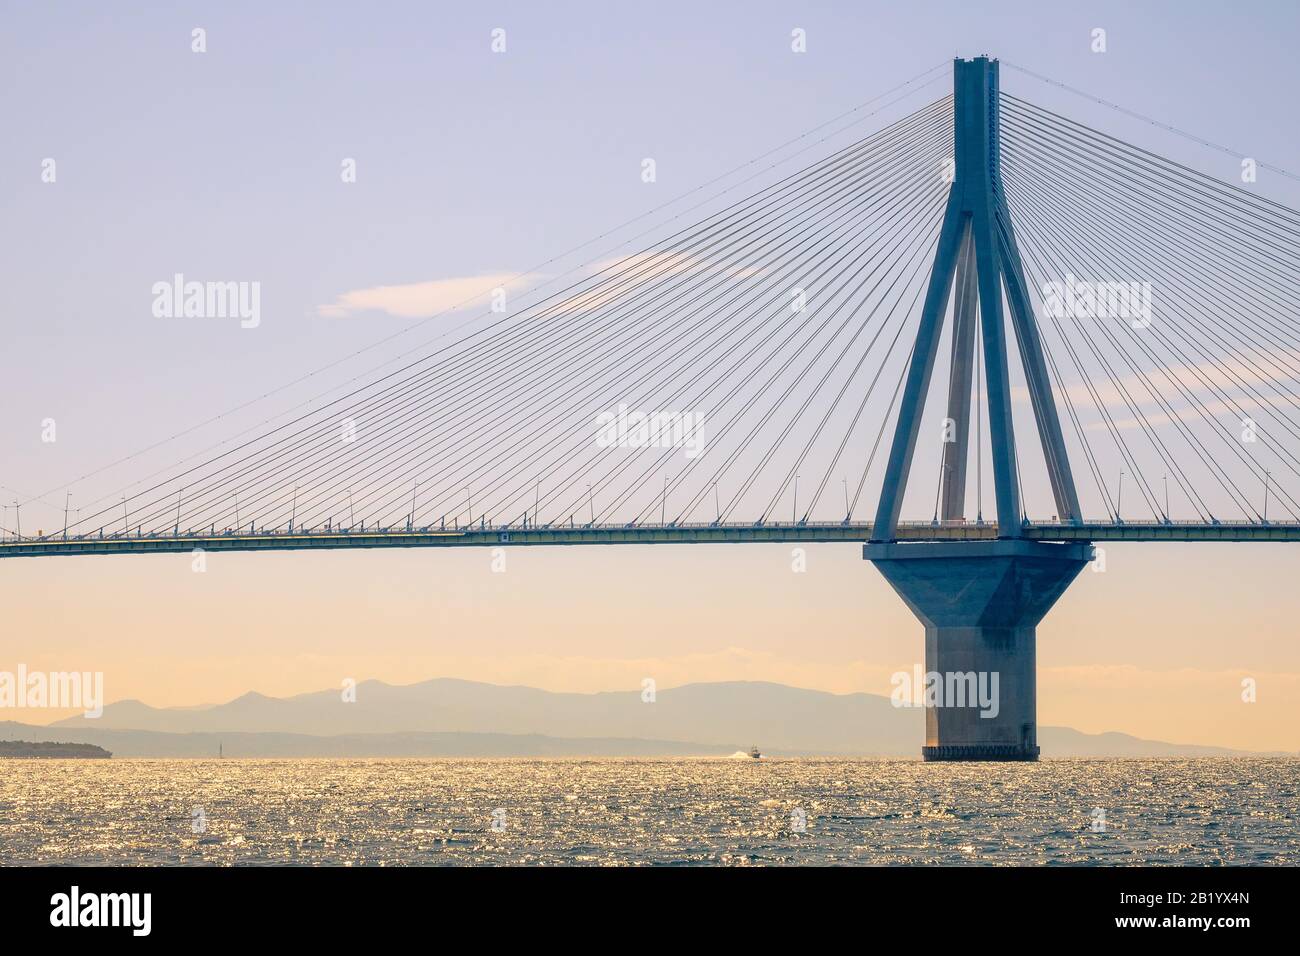 Greece. Bridge Rion Antirion. High pylon of the cable-stayed bridge over the Gulf of Corinth and motor boat in sunny day Stock Photo